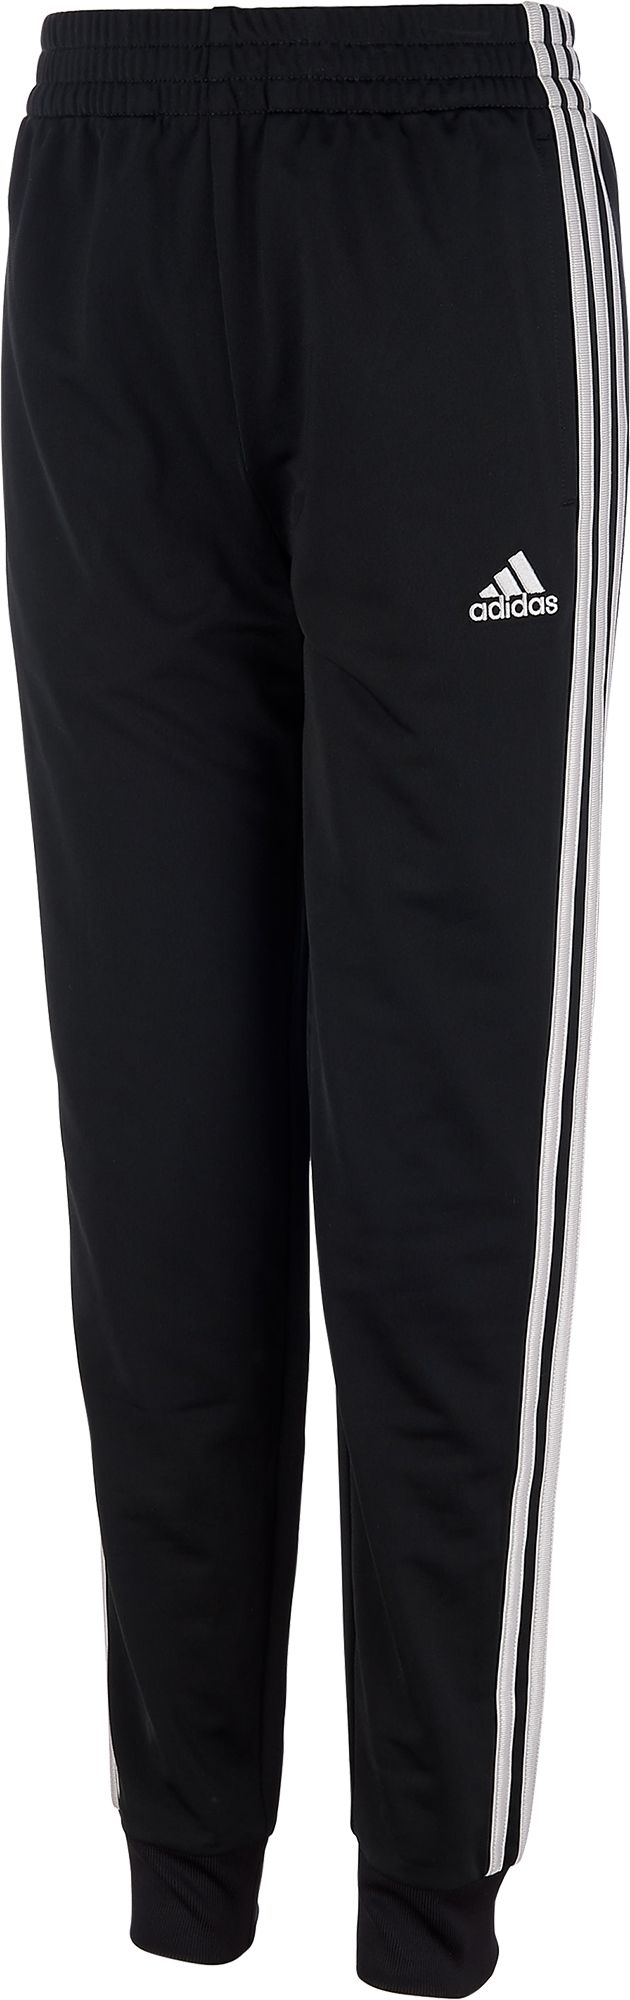 adidas sport trousers